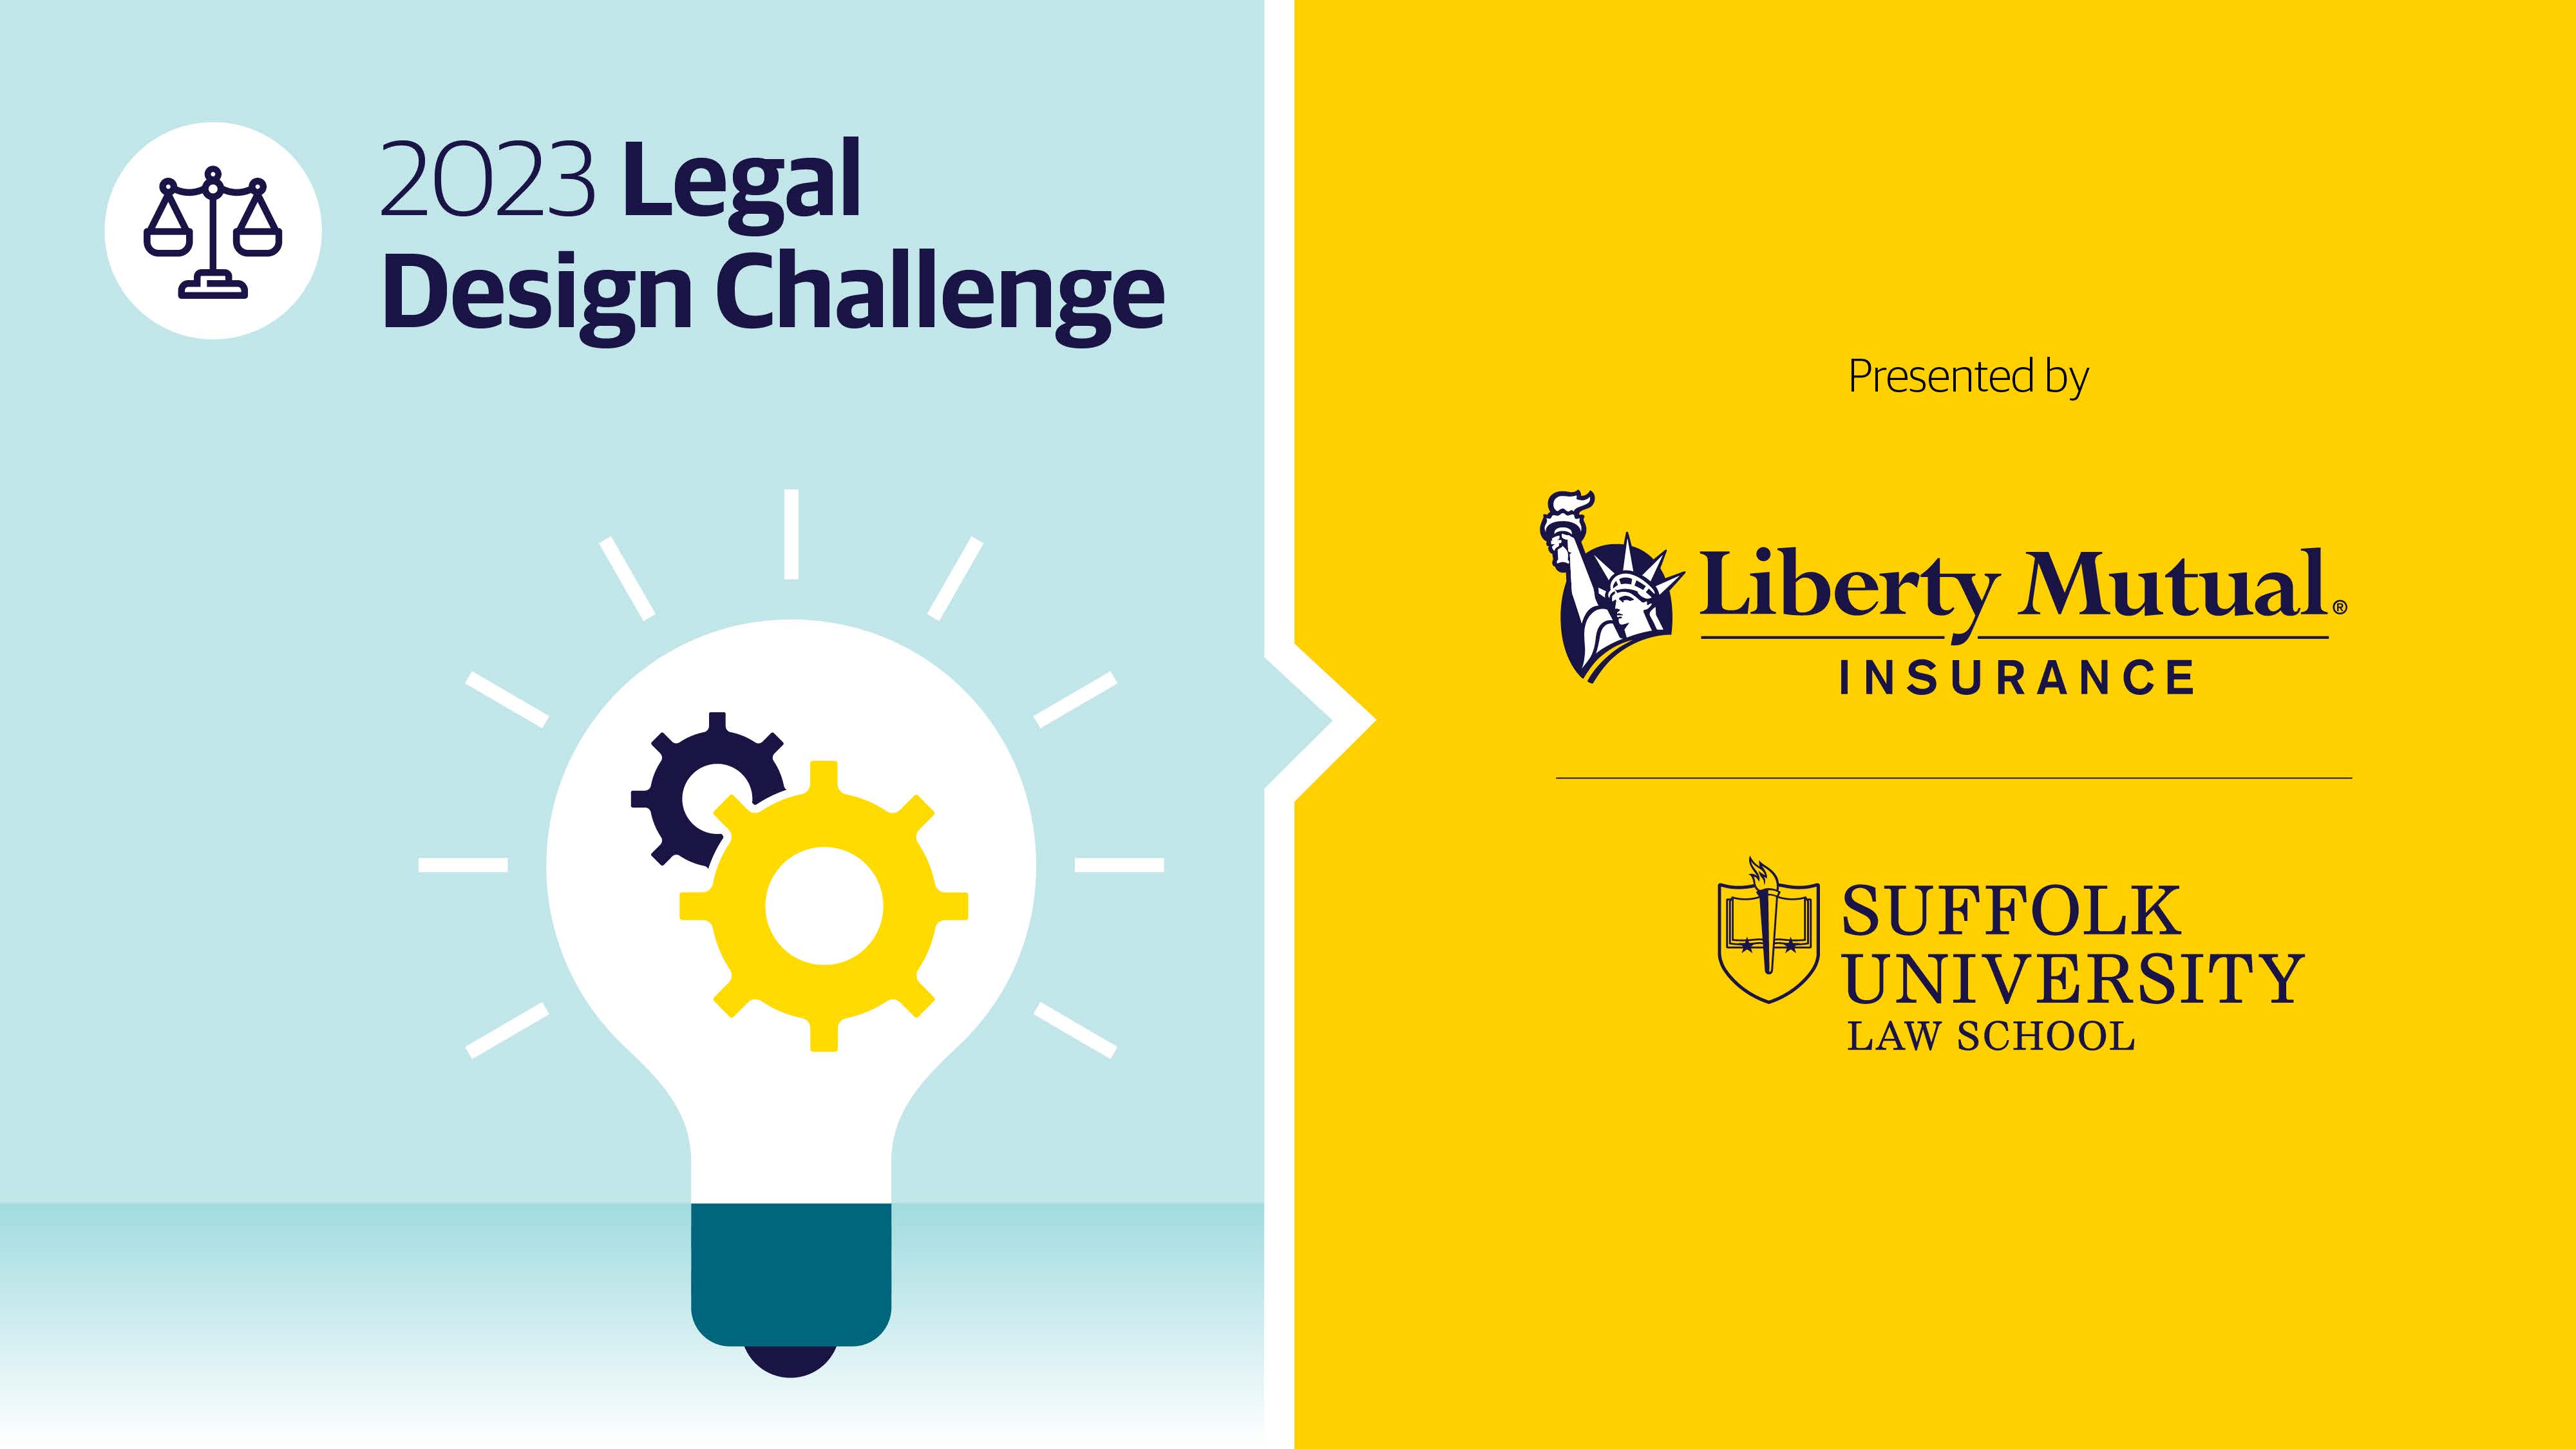 The 2023 Legal Design Challenge logo has a shining lightbulb with gears inside it and the Liberty Mutual and Suffolk Law logos on the side.